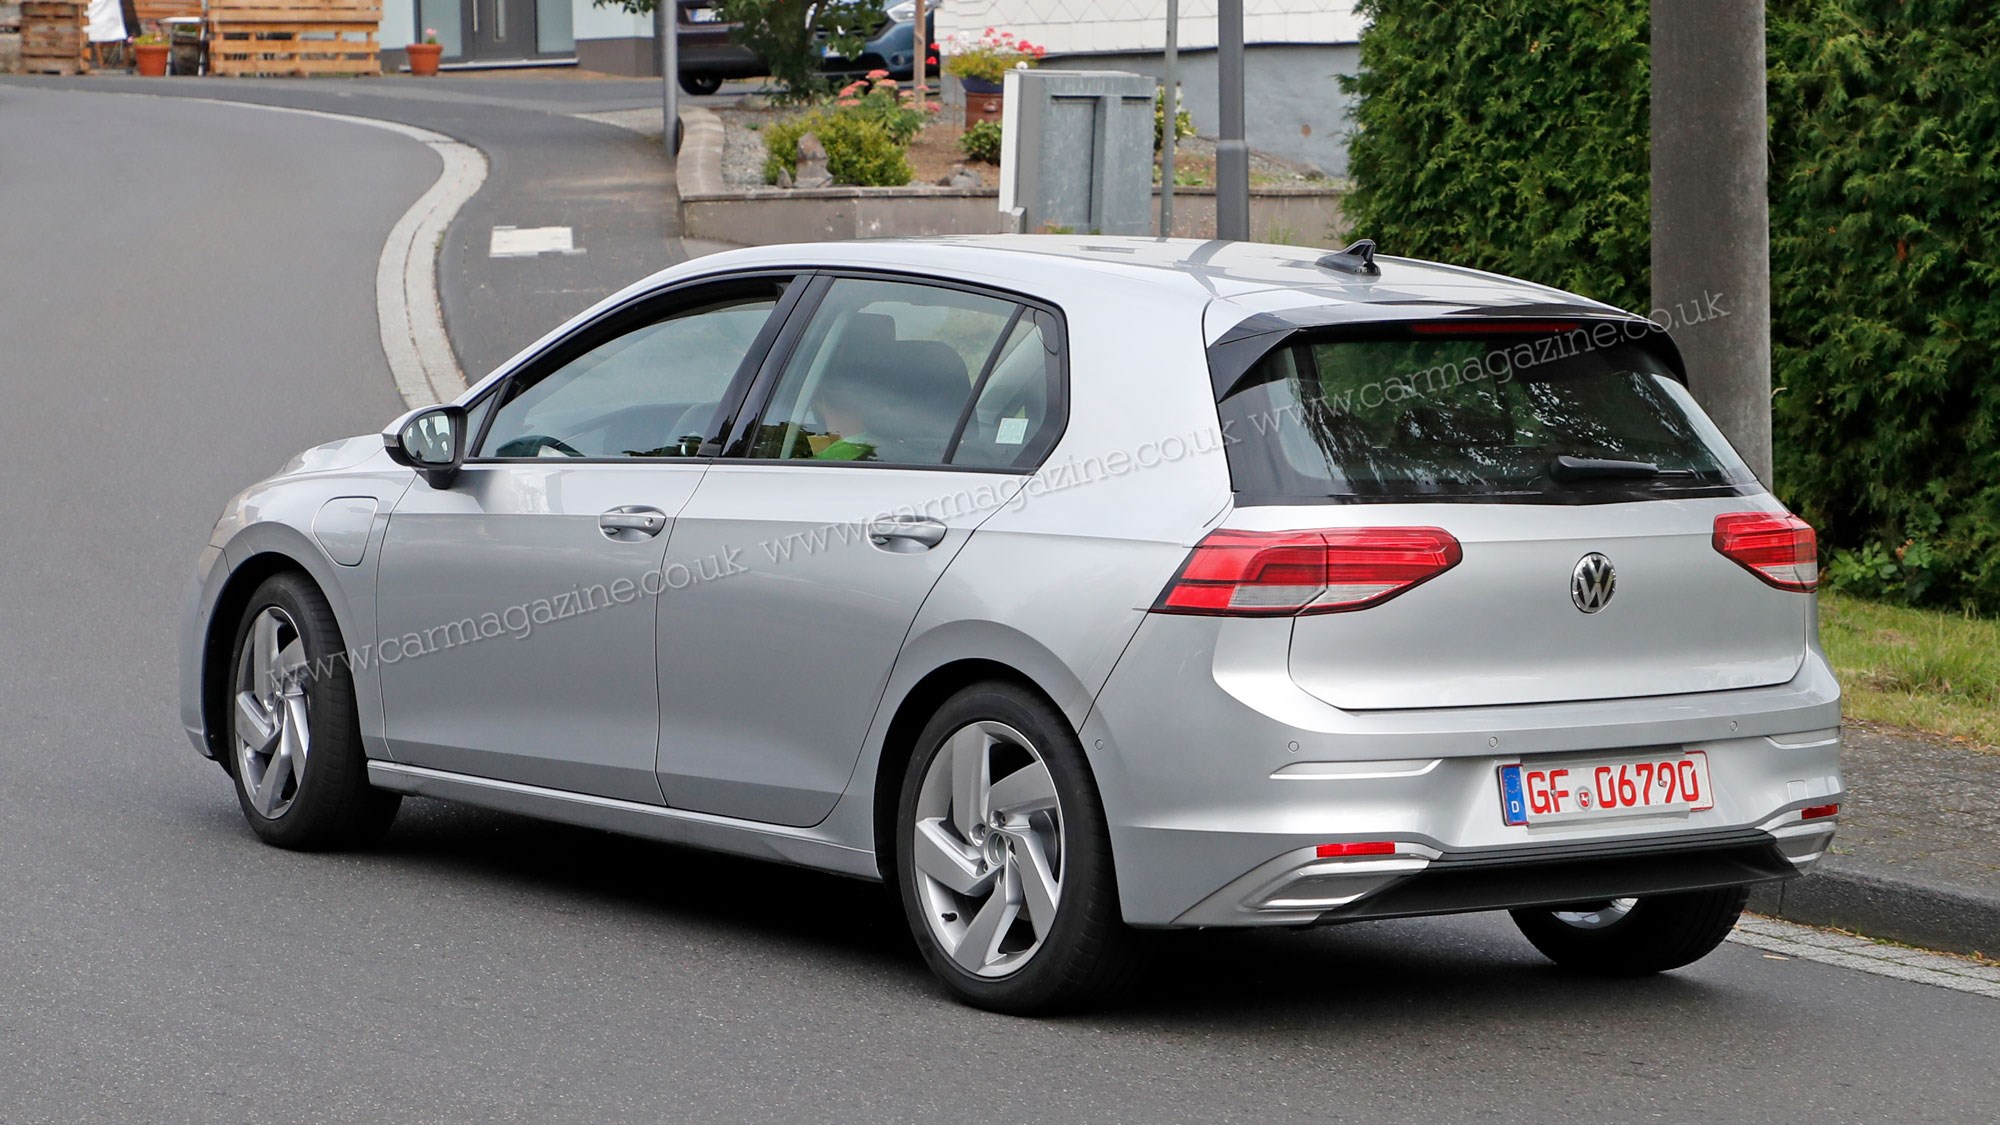 New 2020 Vw Golf Gti Spotted On Winter Test Car Magazine